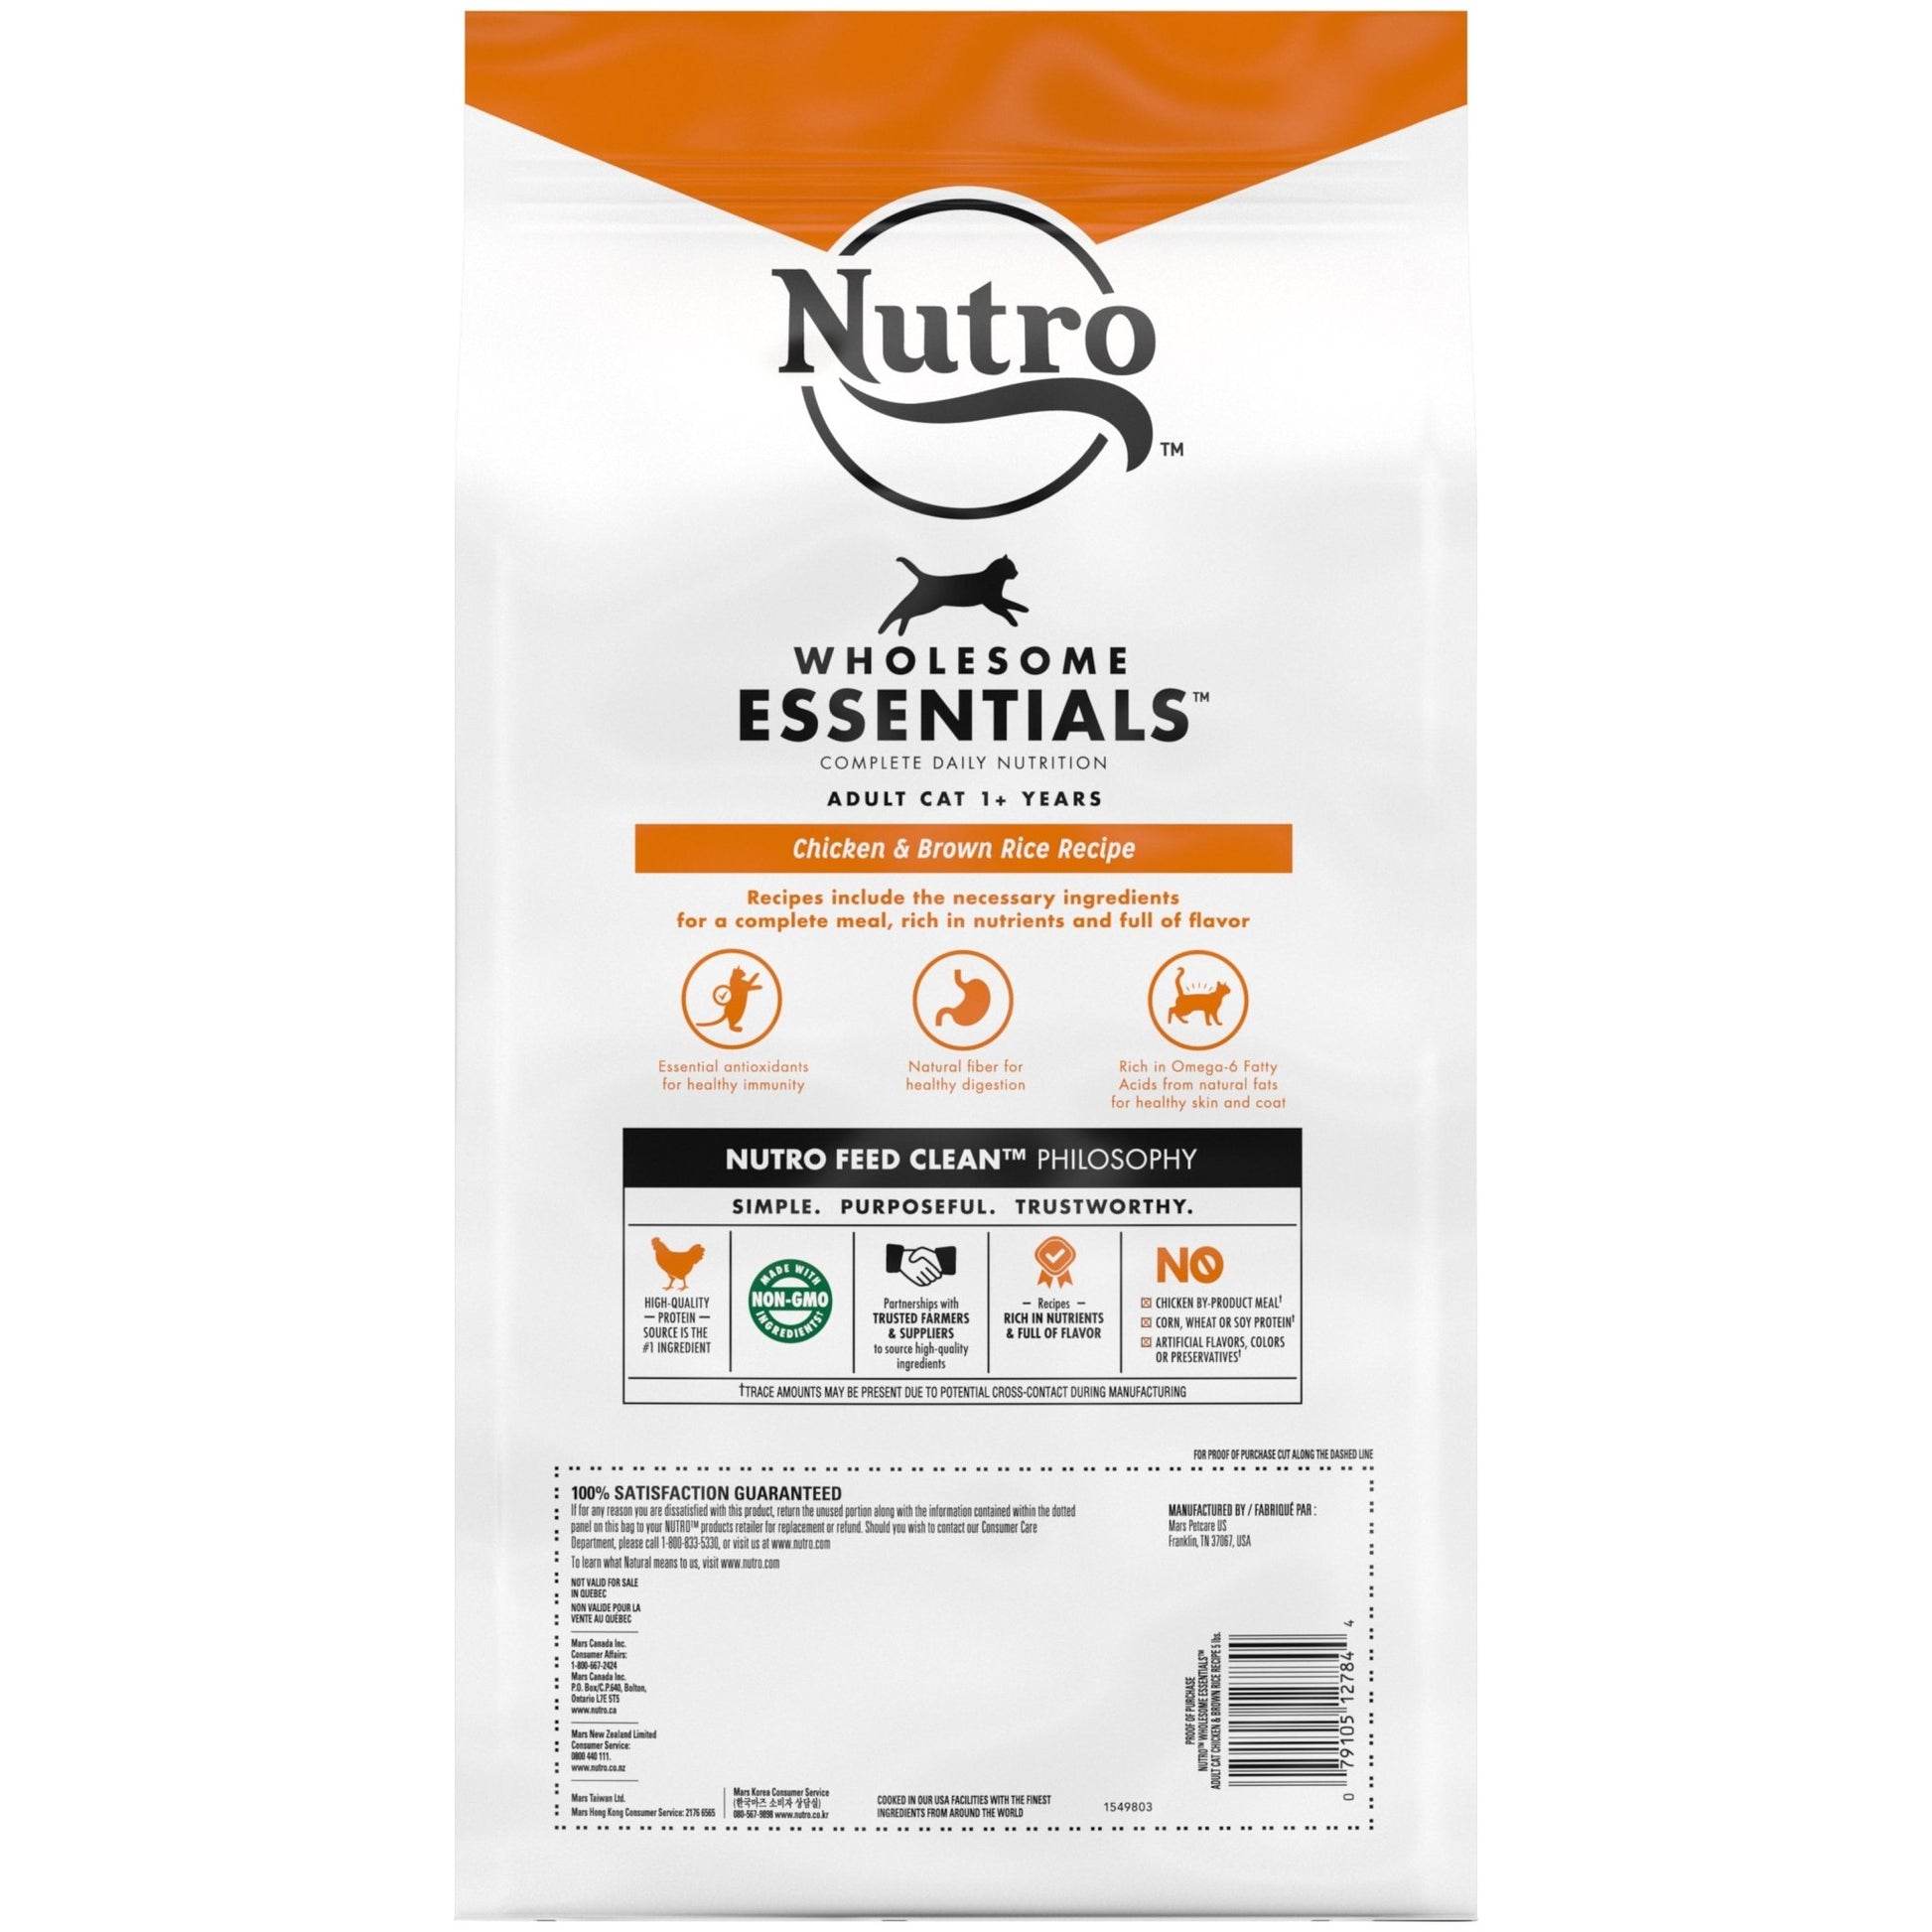 Nutro Products Wholesome Essentials Dry Cat Food 5 lb - Kwik Pets